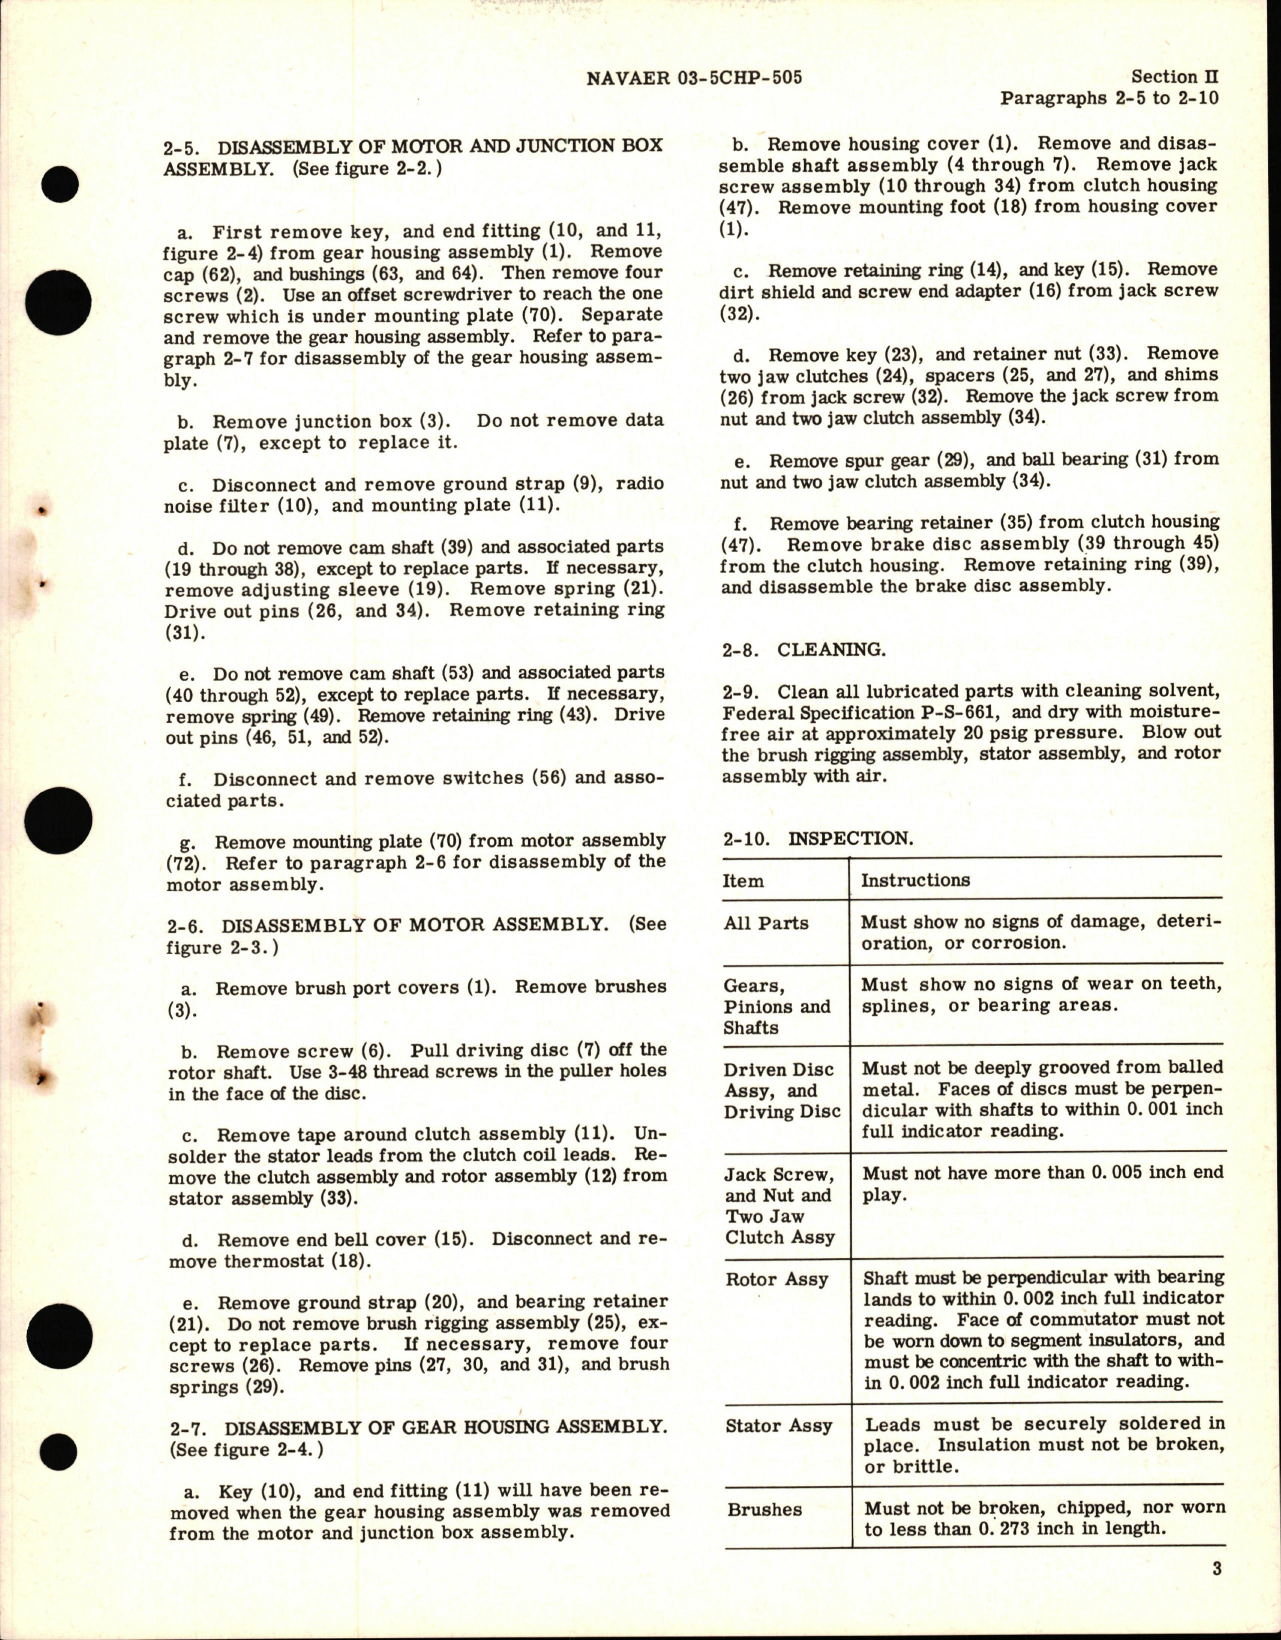 Sample page 5 from AirCorps Library document: Overhaul Instructions for Stabilizer Bungee Trim Actuator Part D1850 and D1850-1